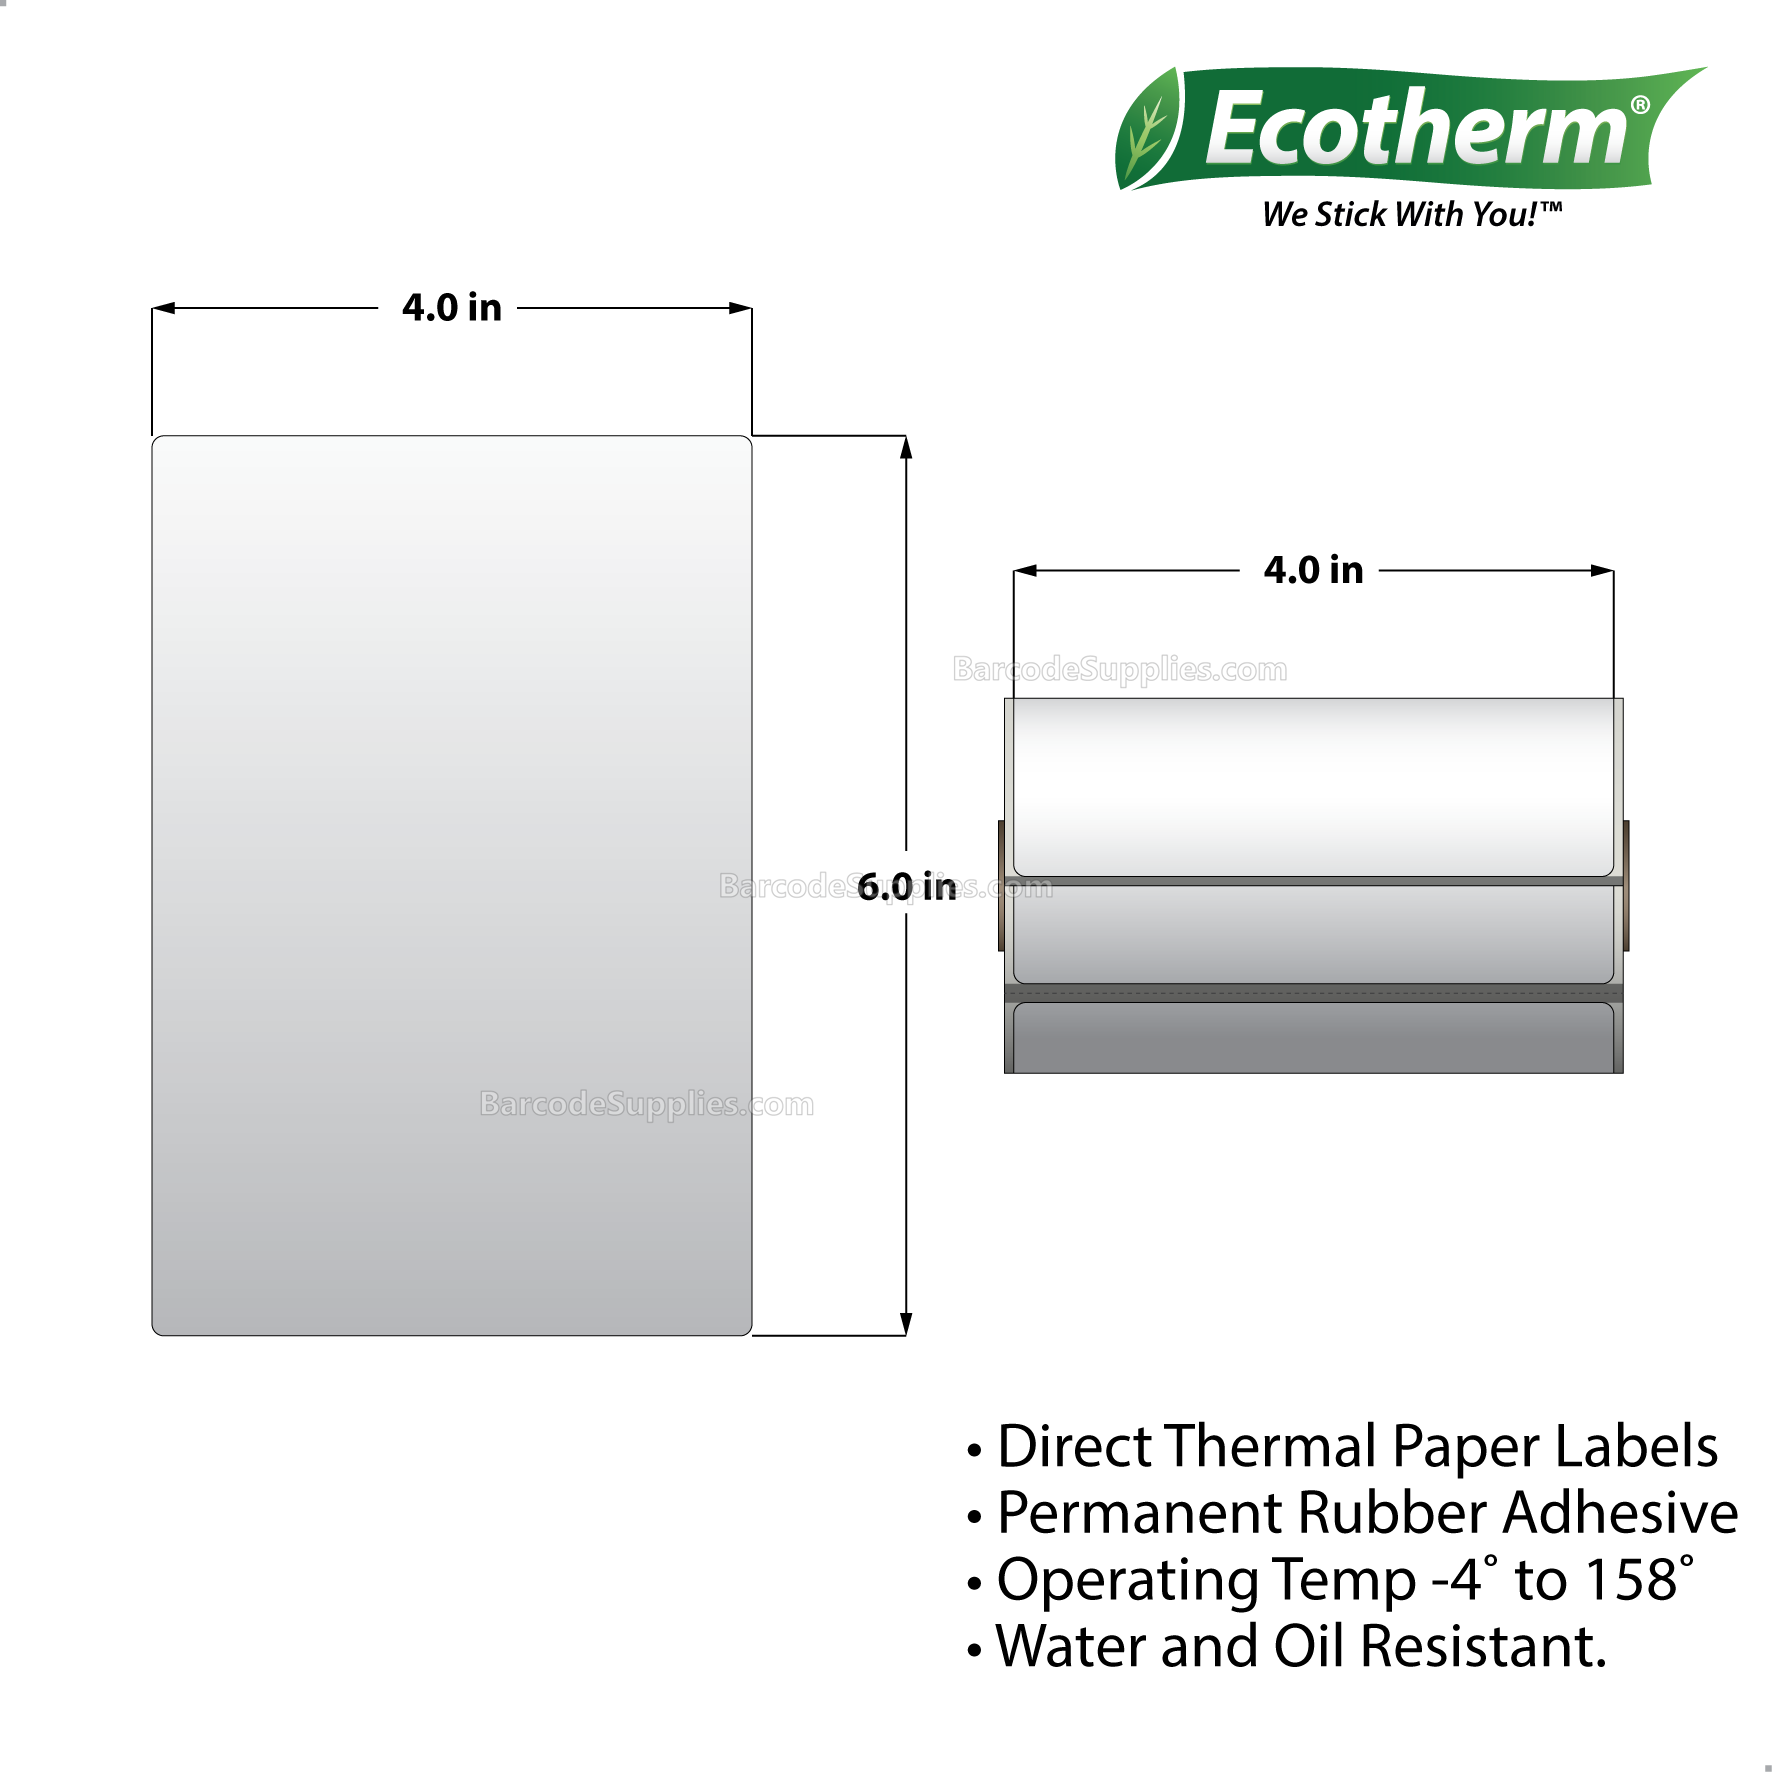 Products 4 x 6 Direct Thermal White Labels With Rubber Adhesive - Perforated - 105 Labels Per Roll - Carton Of 36 Rolls - 3780 Labels Total - MPN: ECOTHERM13108-36